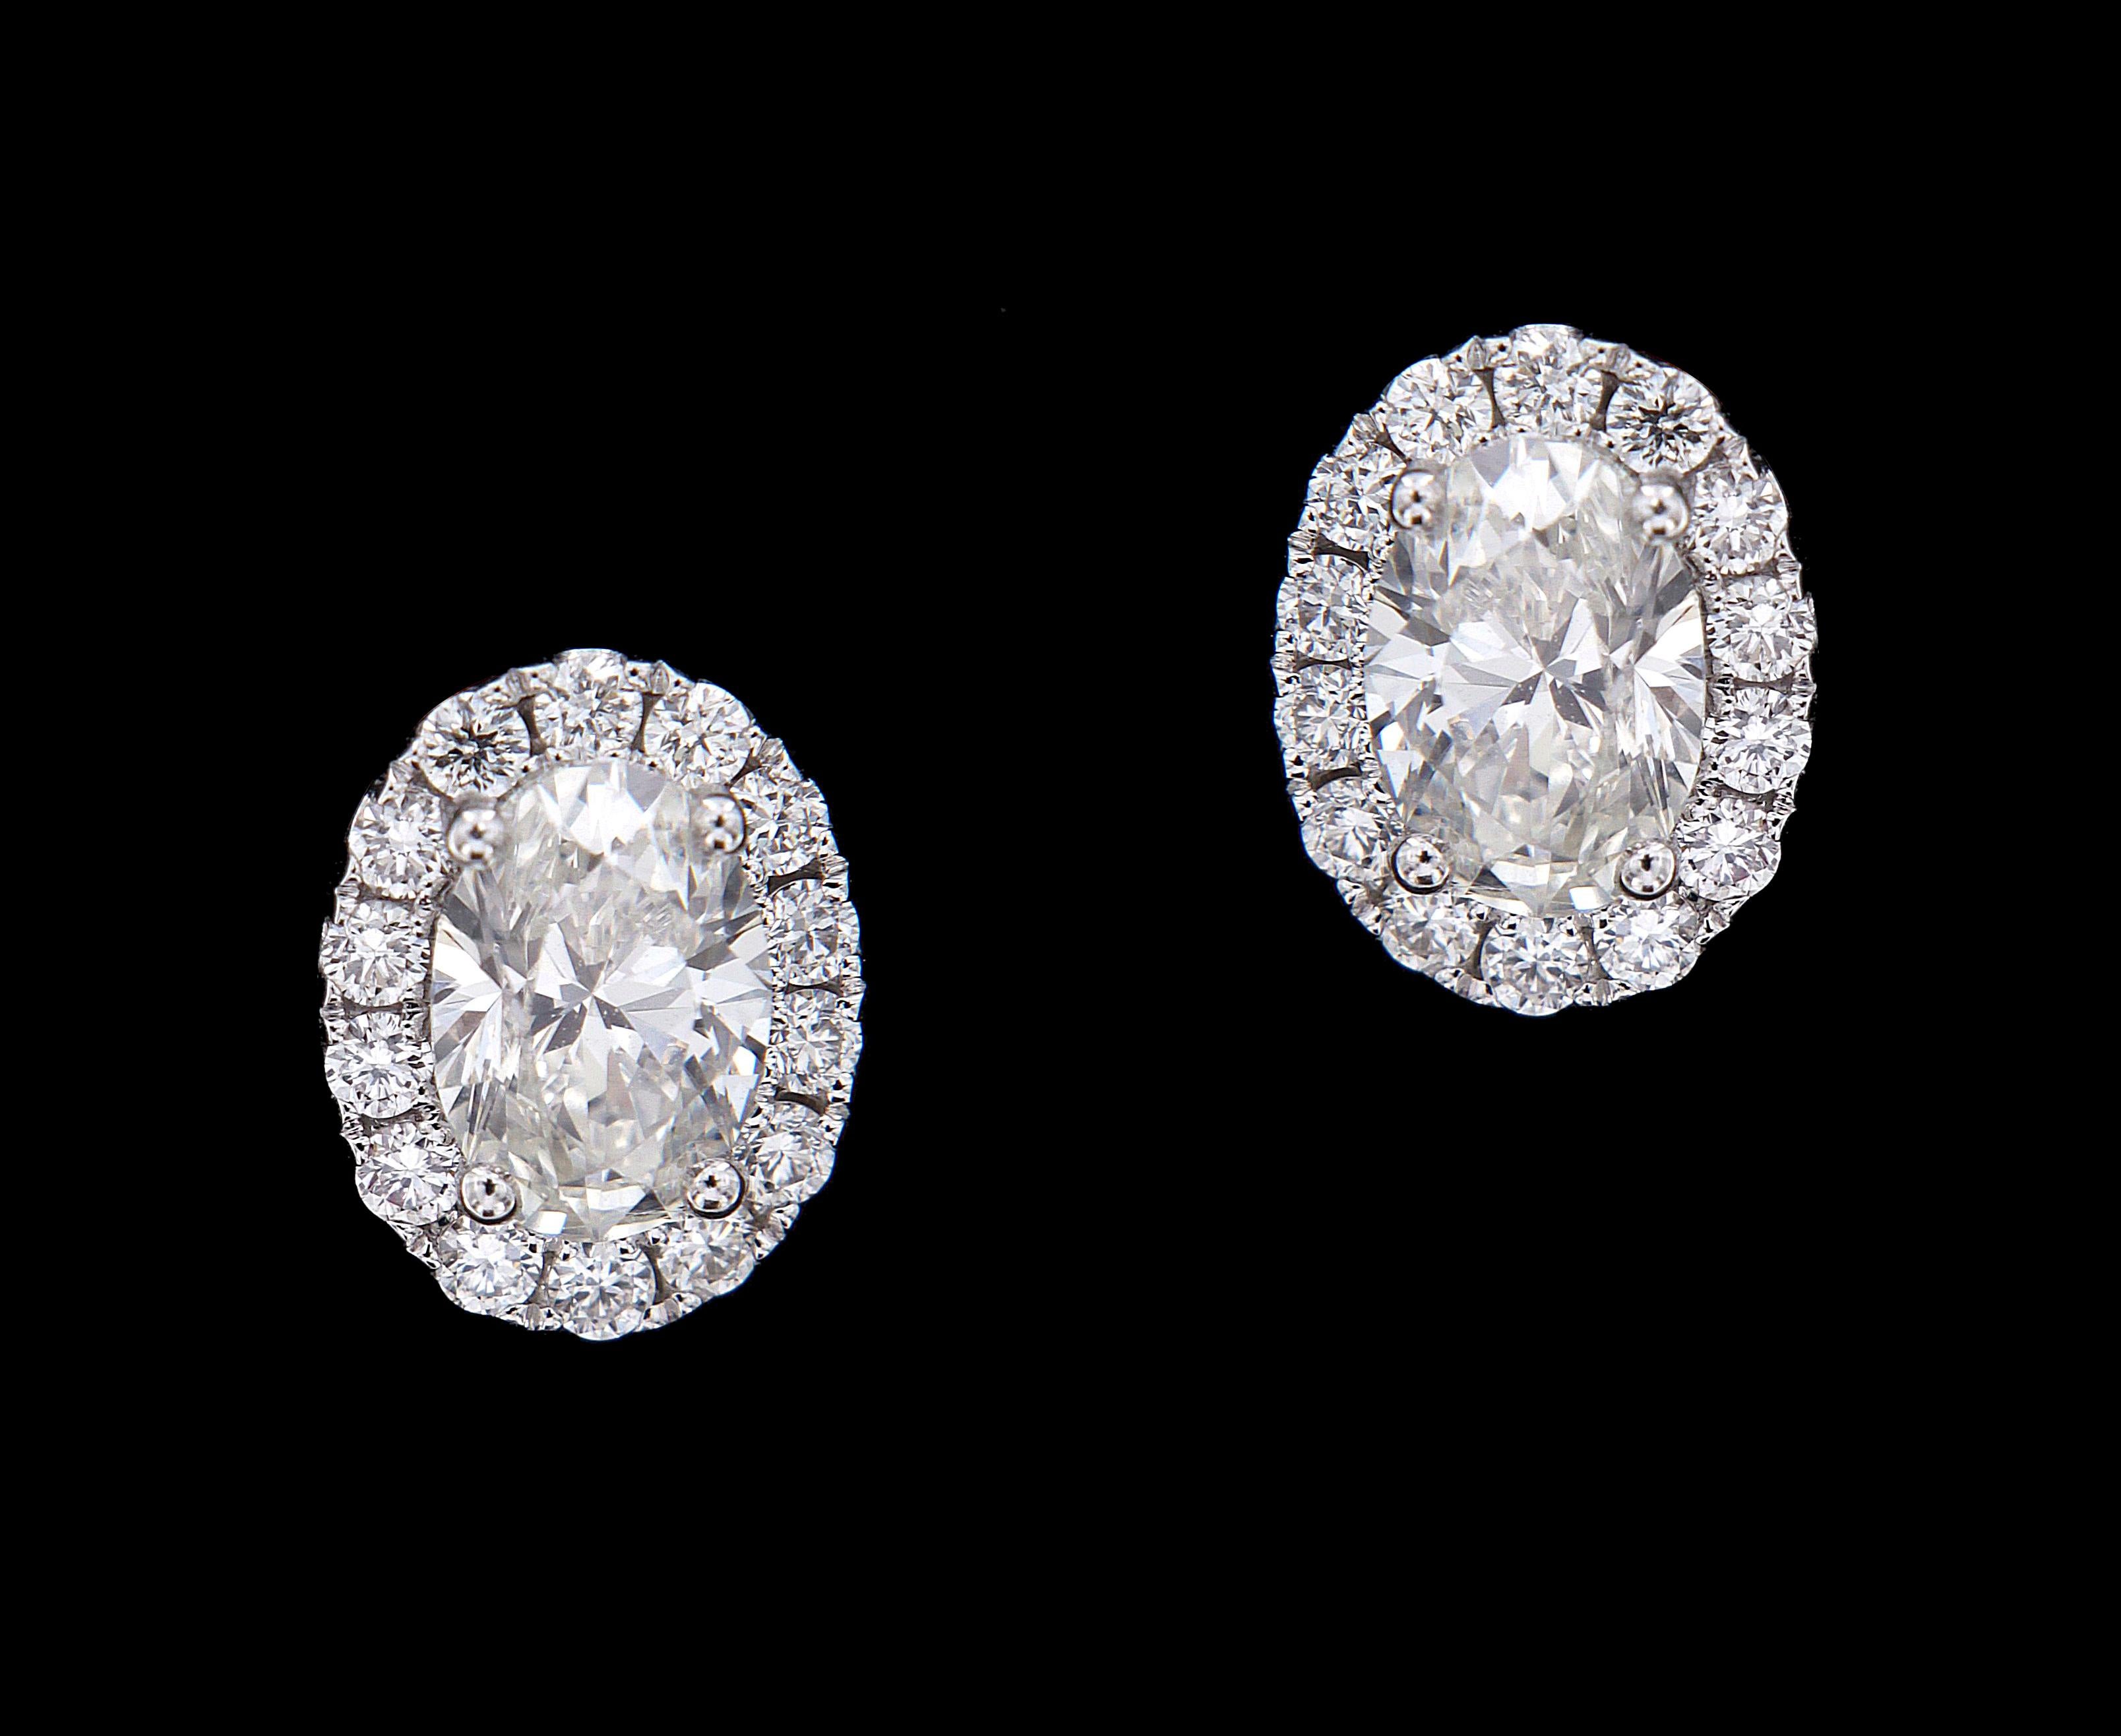 18 Karat White Gold and Diamond Earrings.

Diamonds of approximately 1.002 carats and mounted on 18 karats white gold earrings. The earrings weigh approximately 1.96 grams.

Please note: The charges specified do not include any shipment, VAT, DUTY,